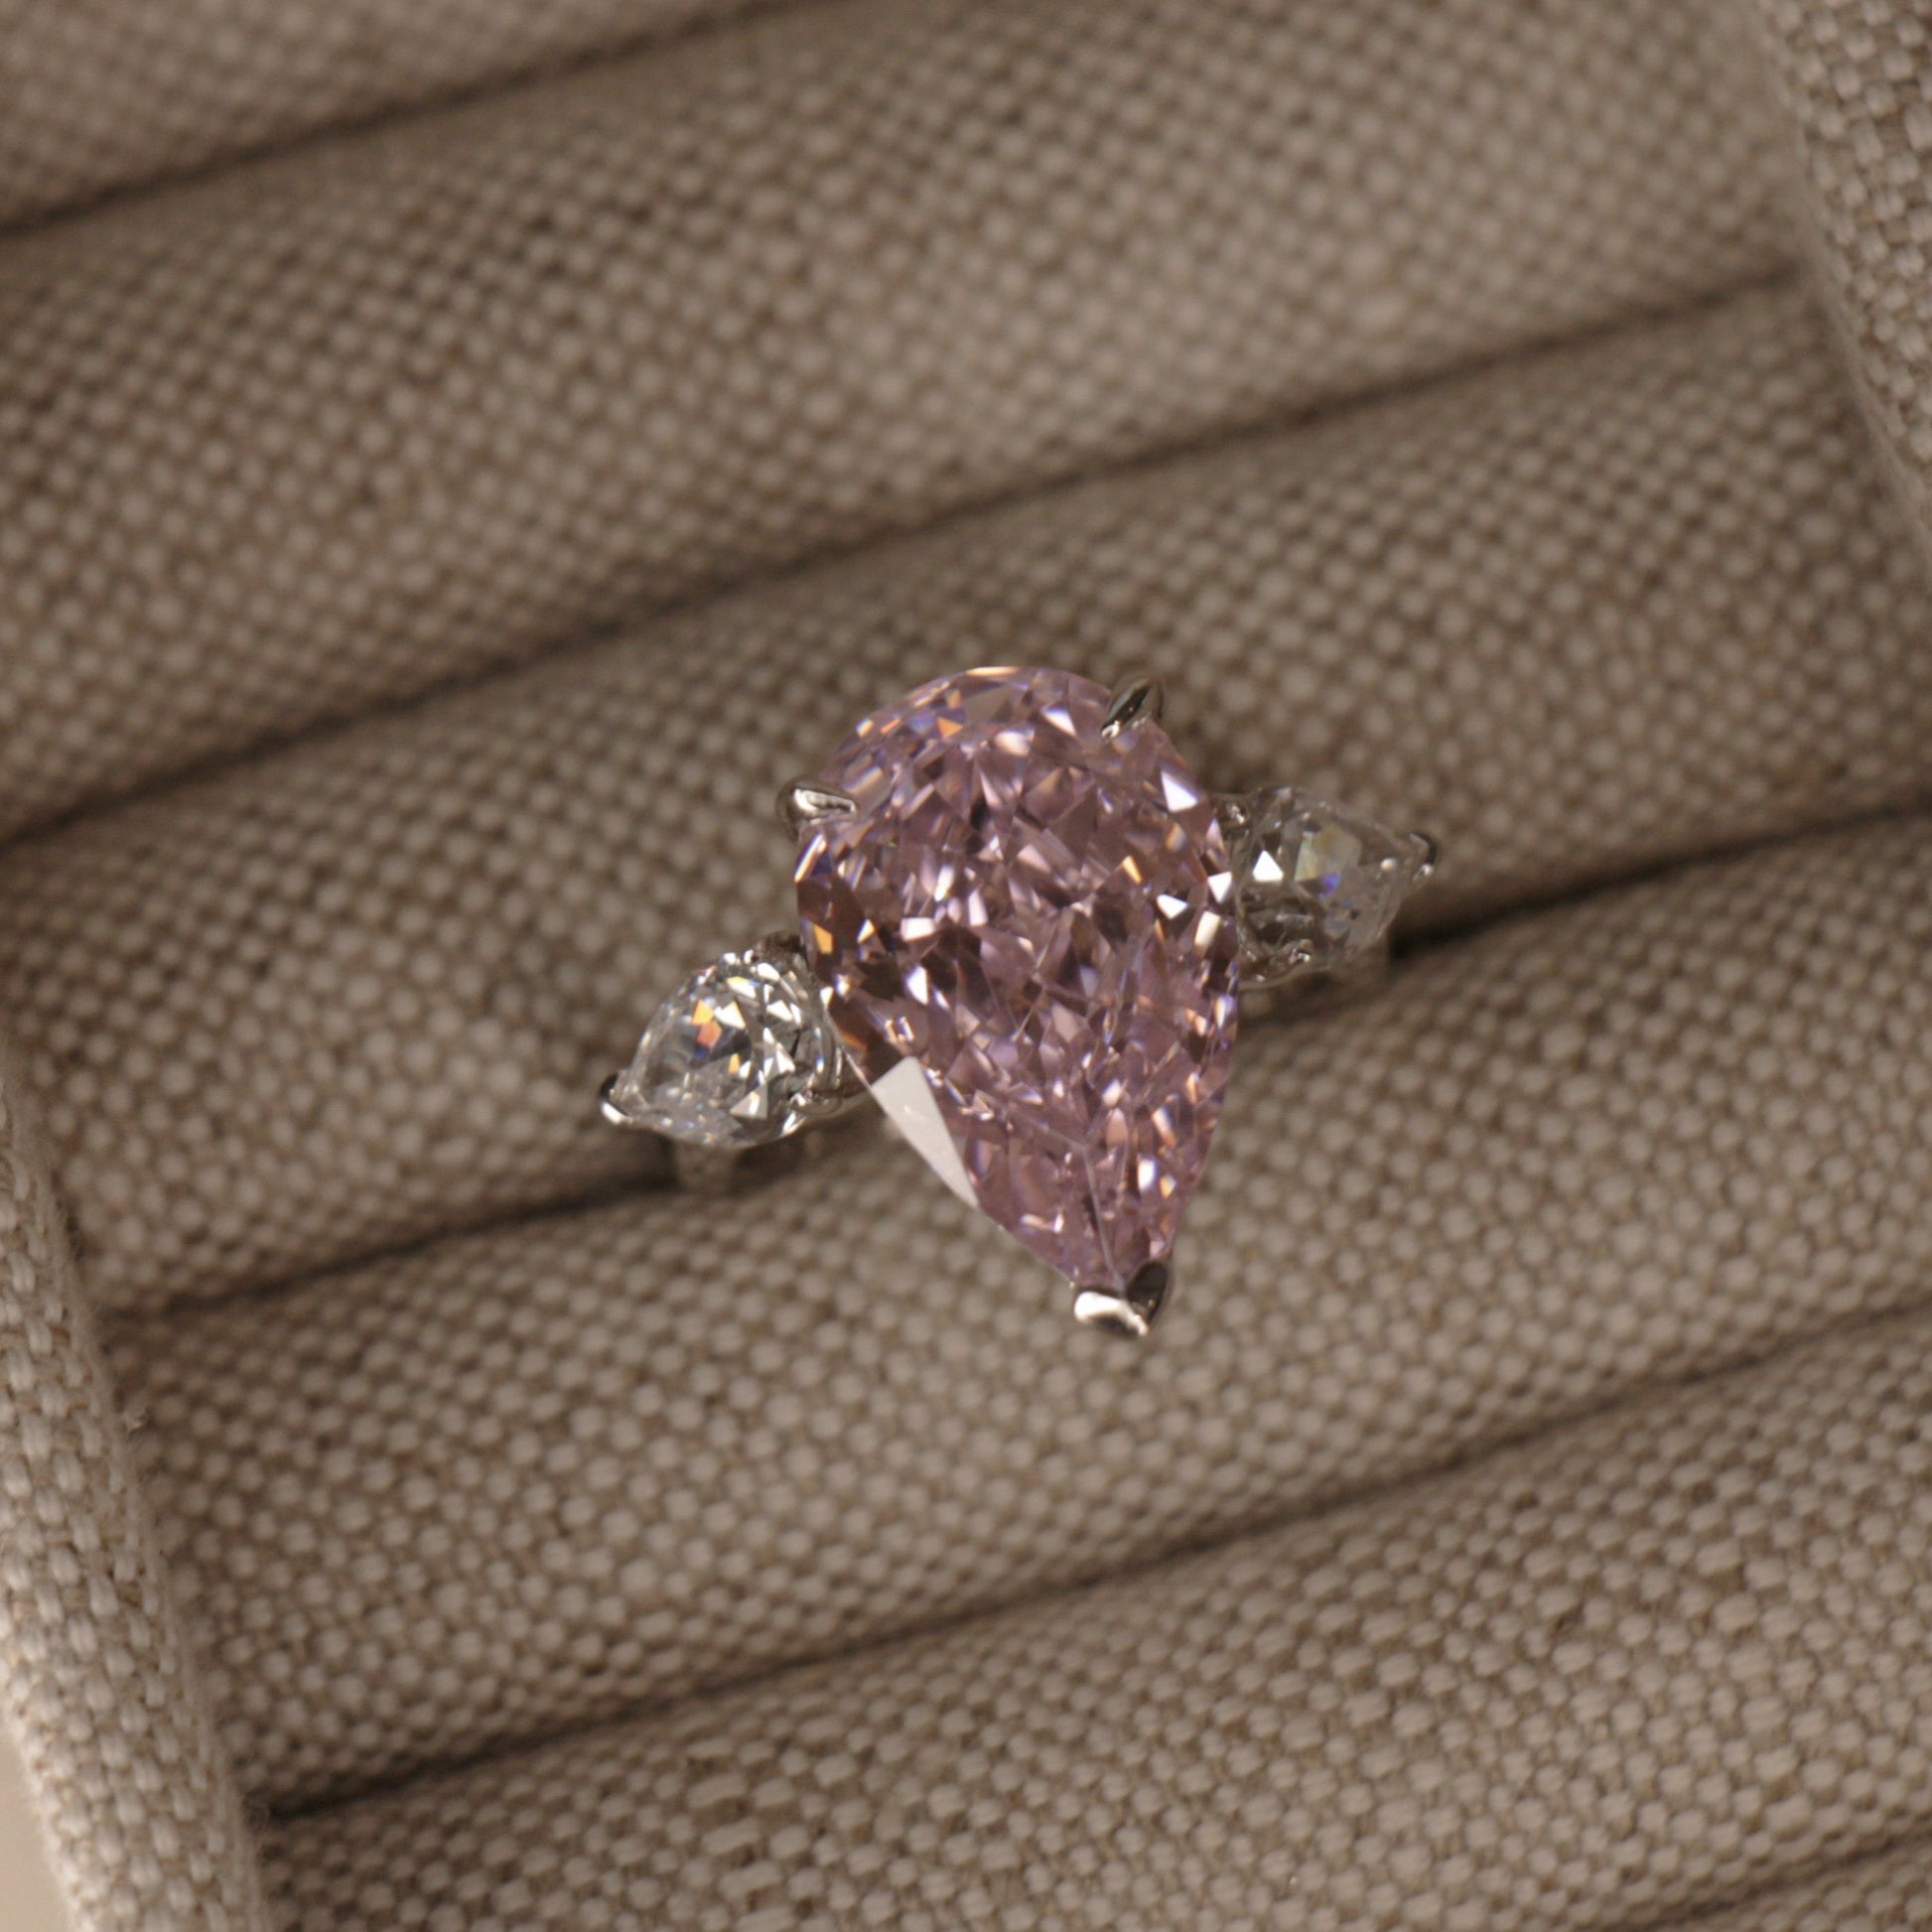 8 Carat Pink Pear Shape Engagement Ring on 925 Silver Band by Margalit Rings, anna kournikova engagement ring from enrquire inglesias